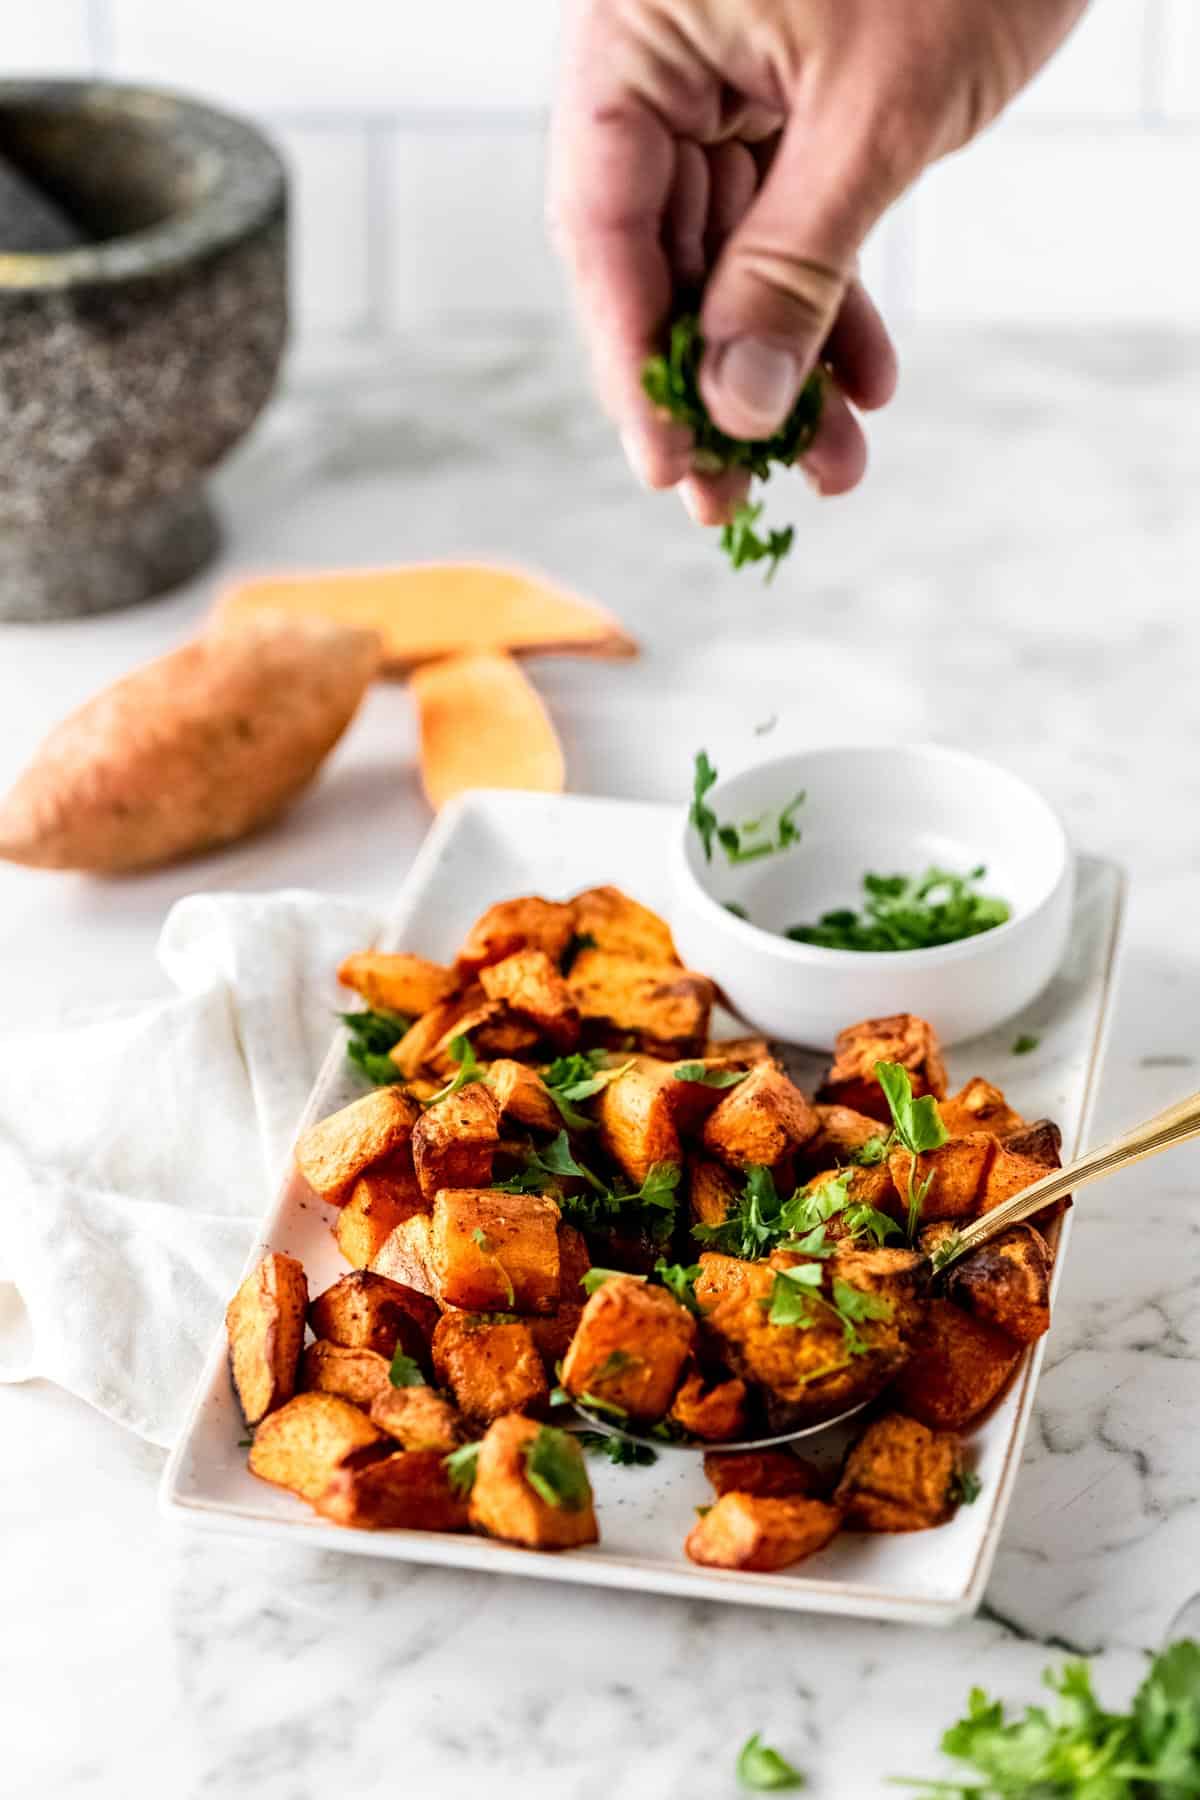 Sweet potato bites being sprinkled by hand with fresh cut parsley.